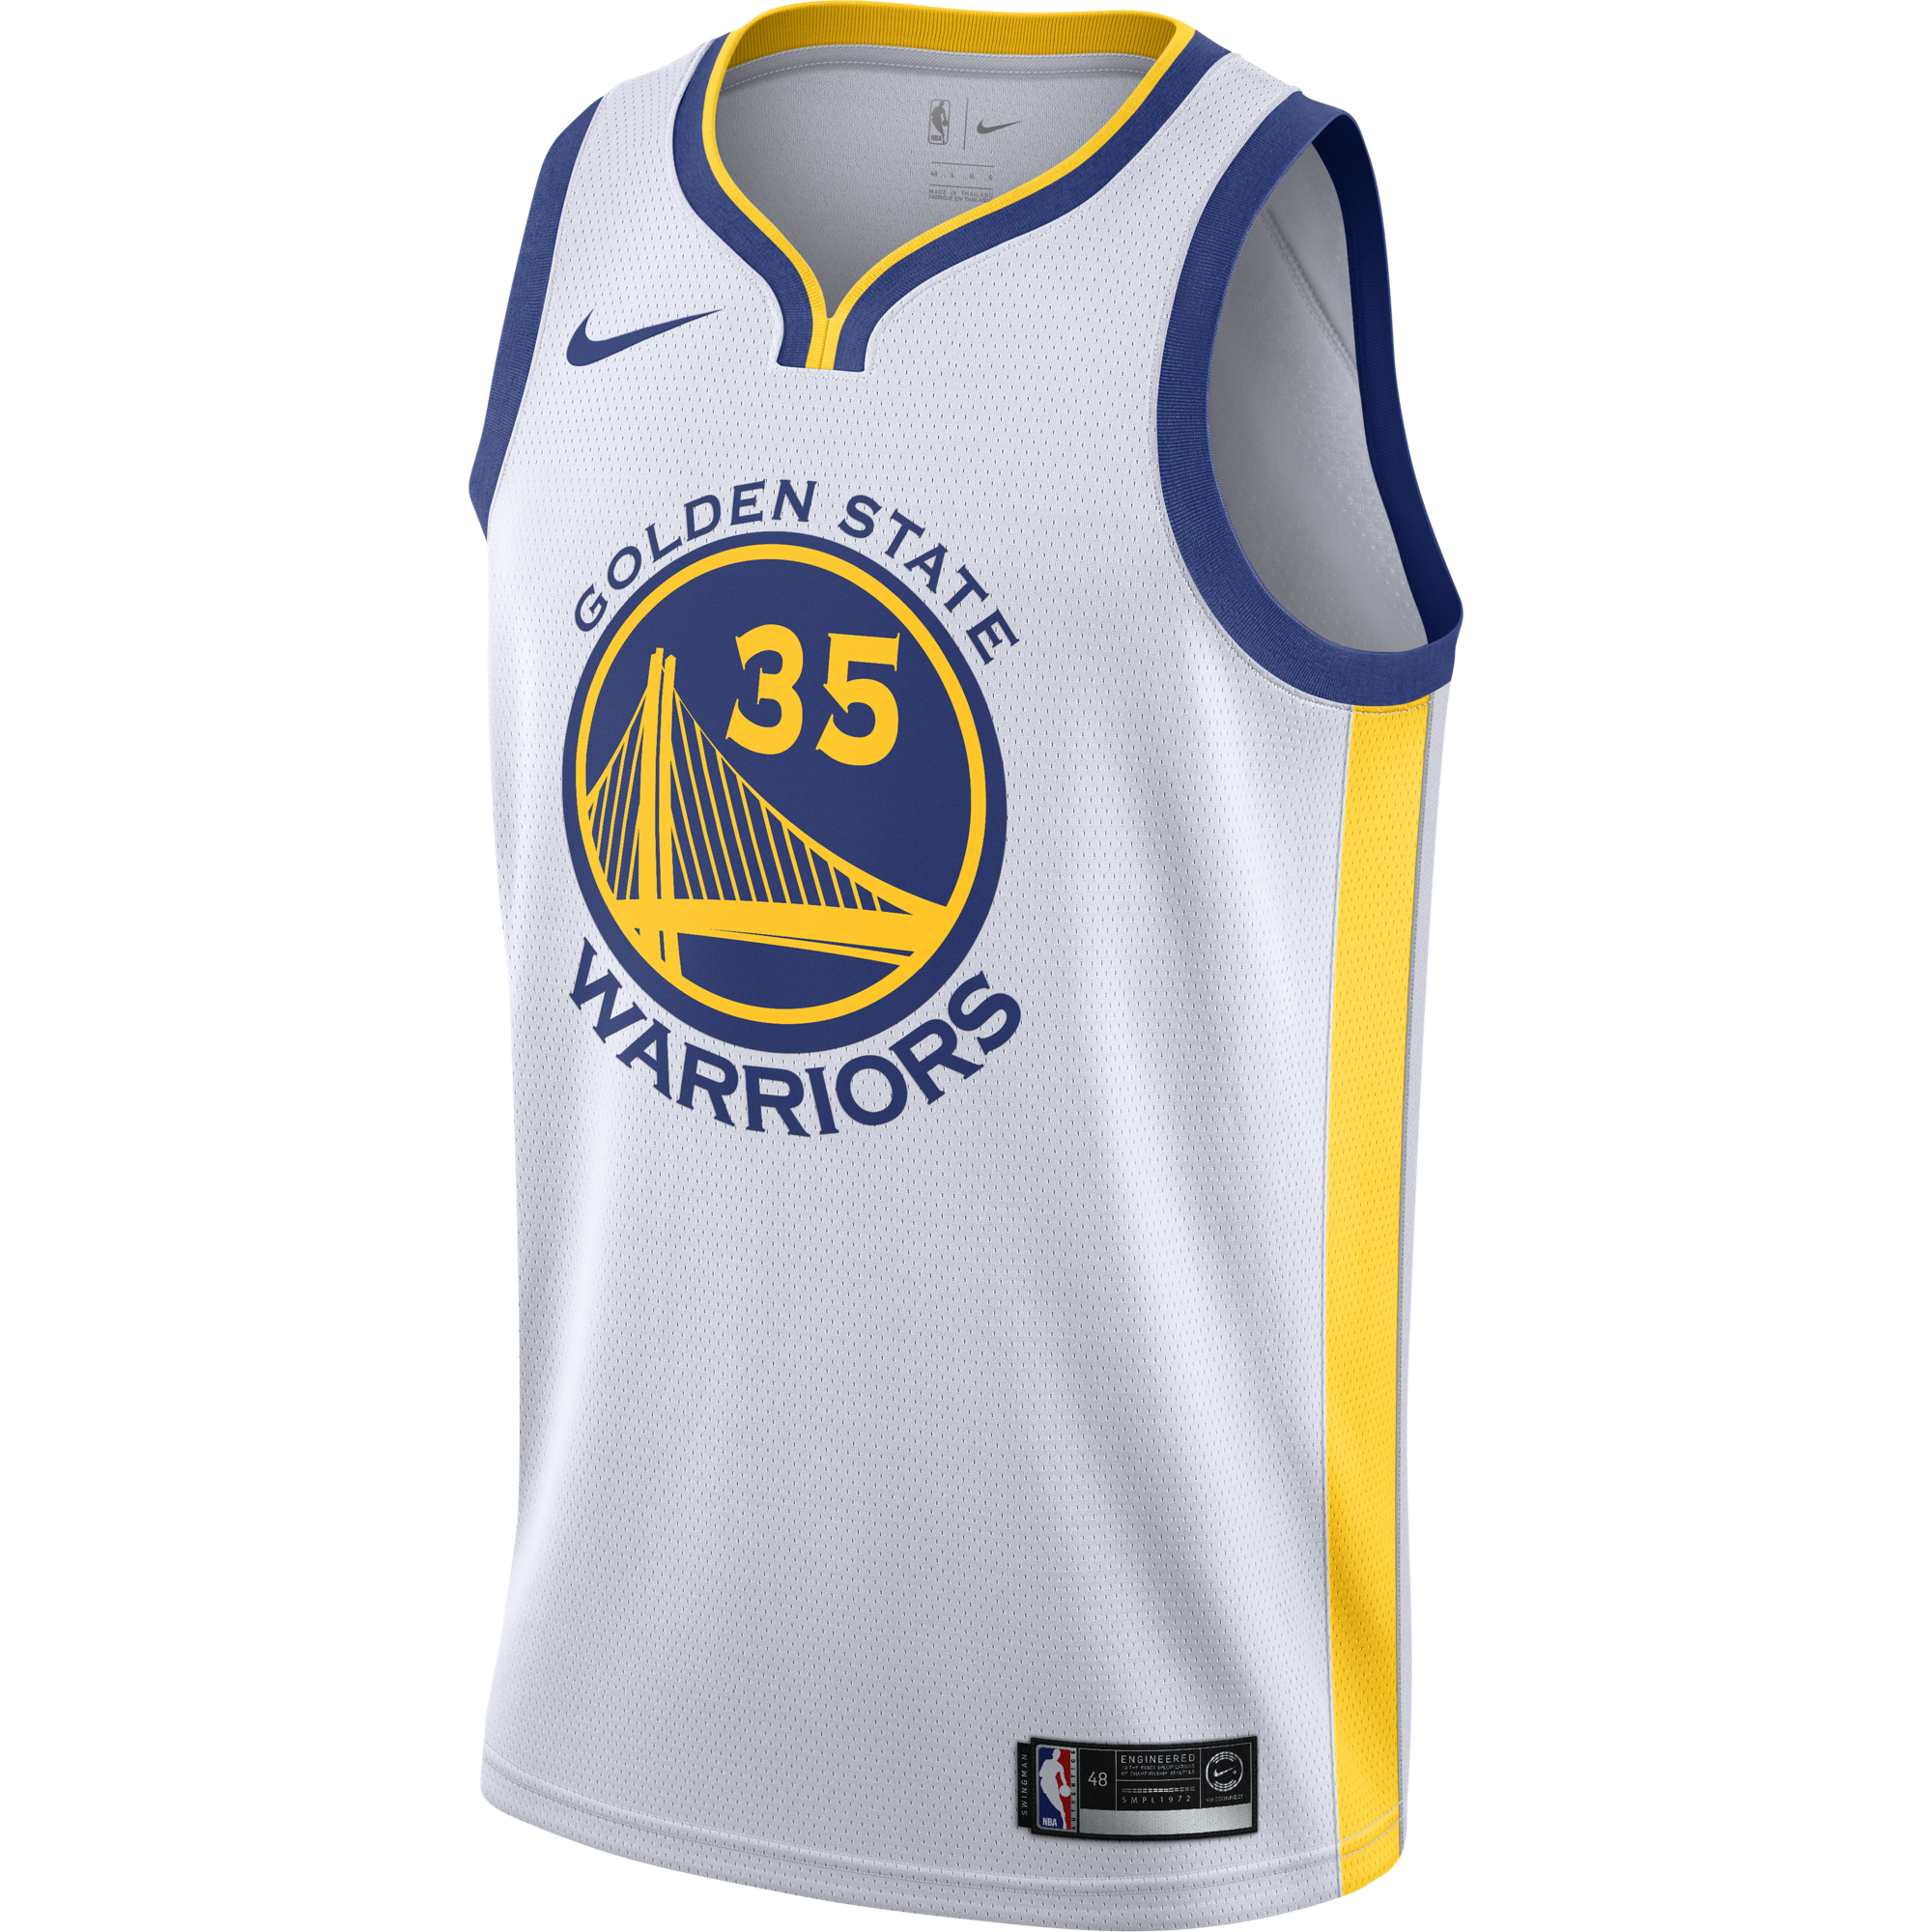 kevin durant warriors jersey